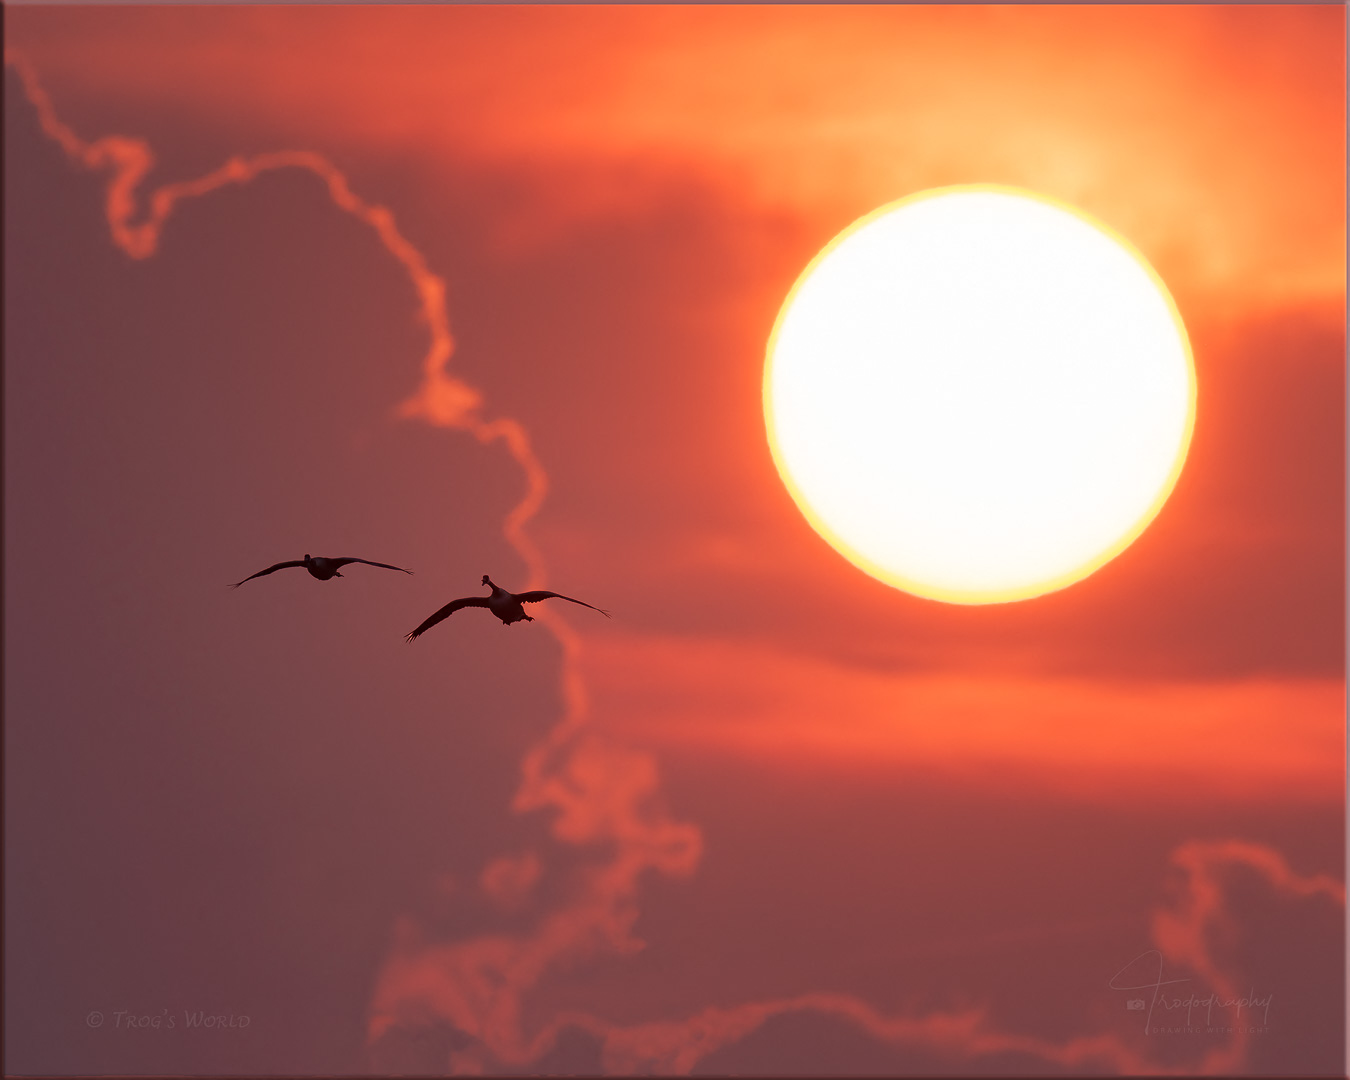 Geese flying and setting sun